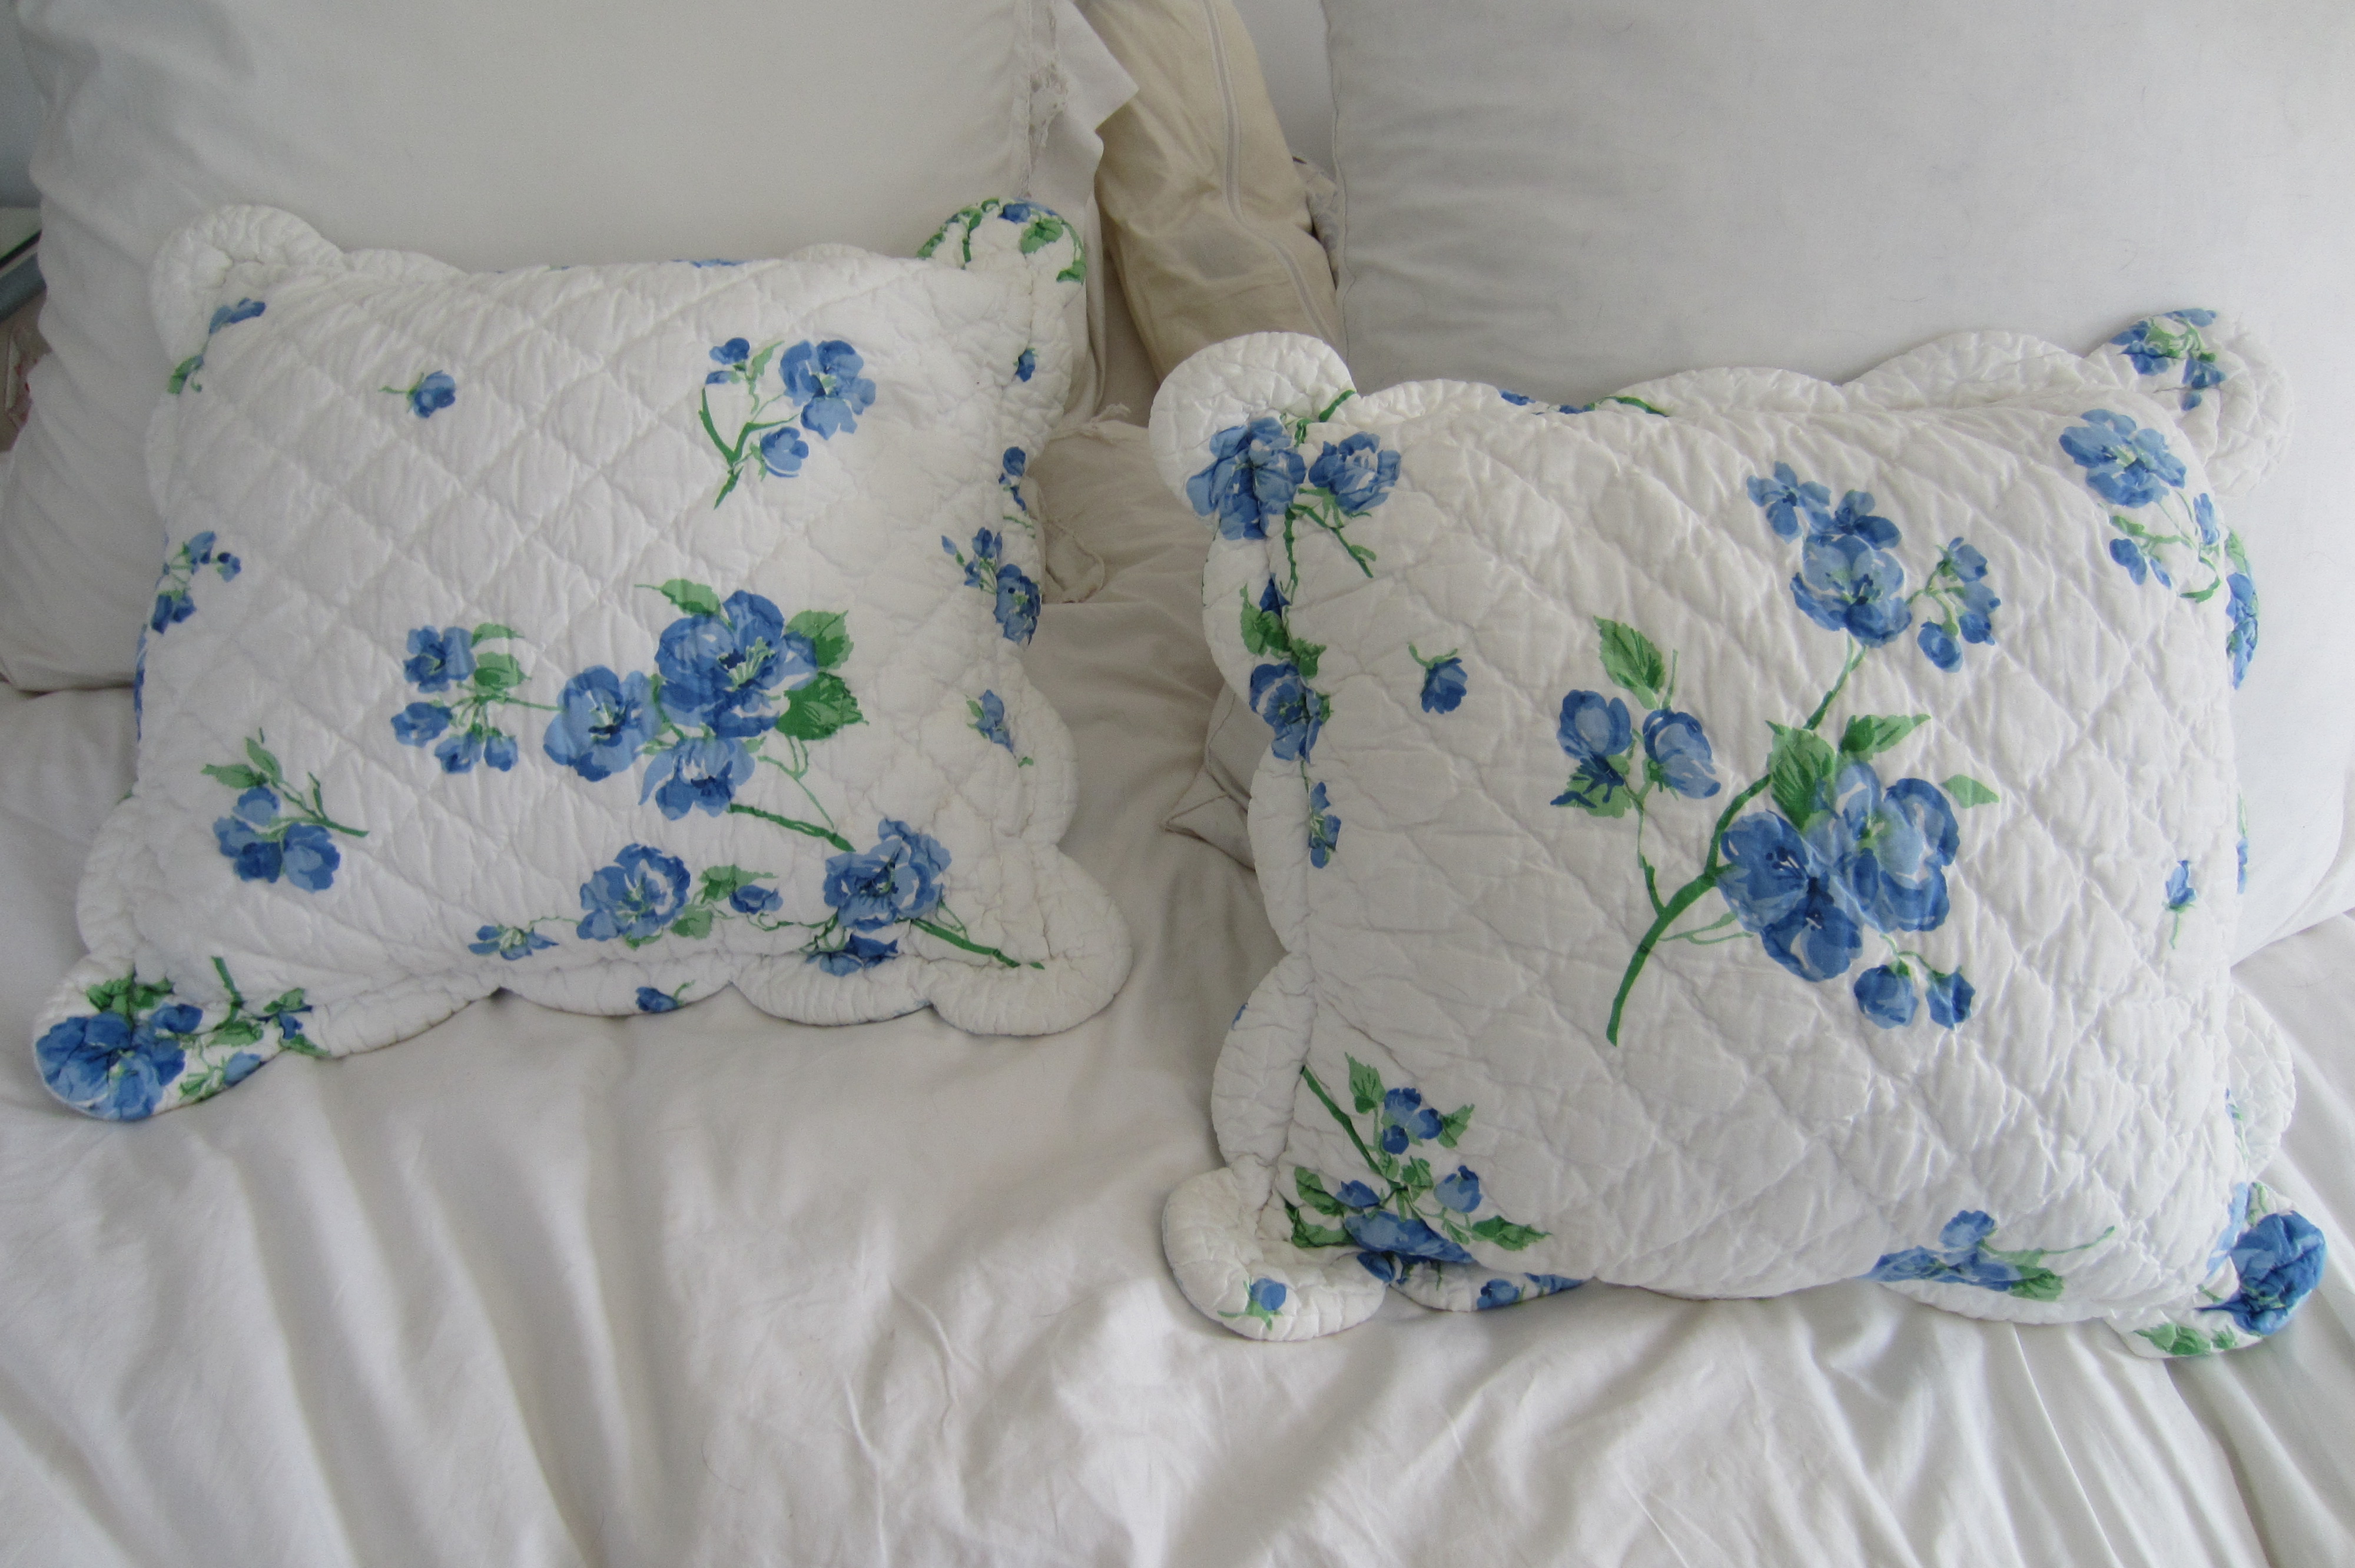 Throw pillows with freshly-washed quilted covers